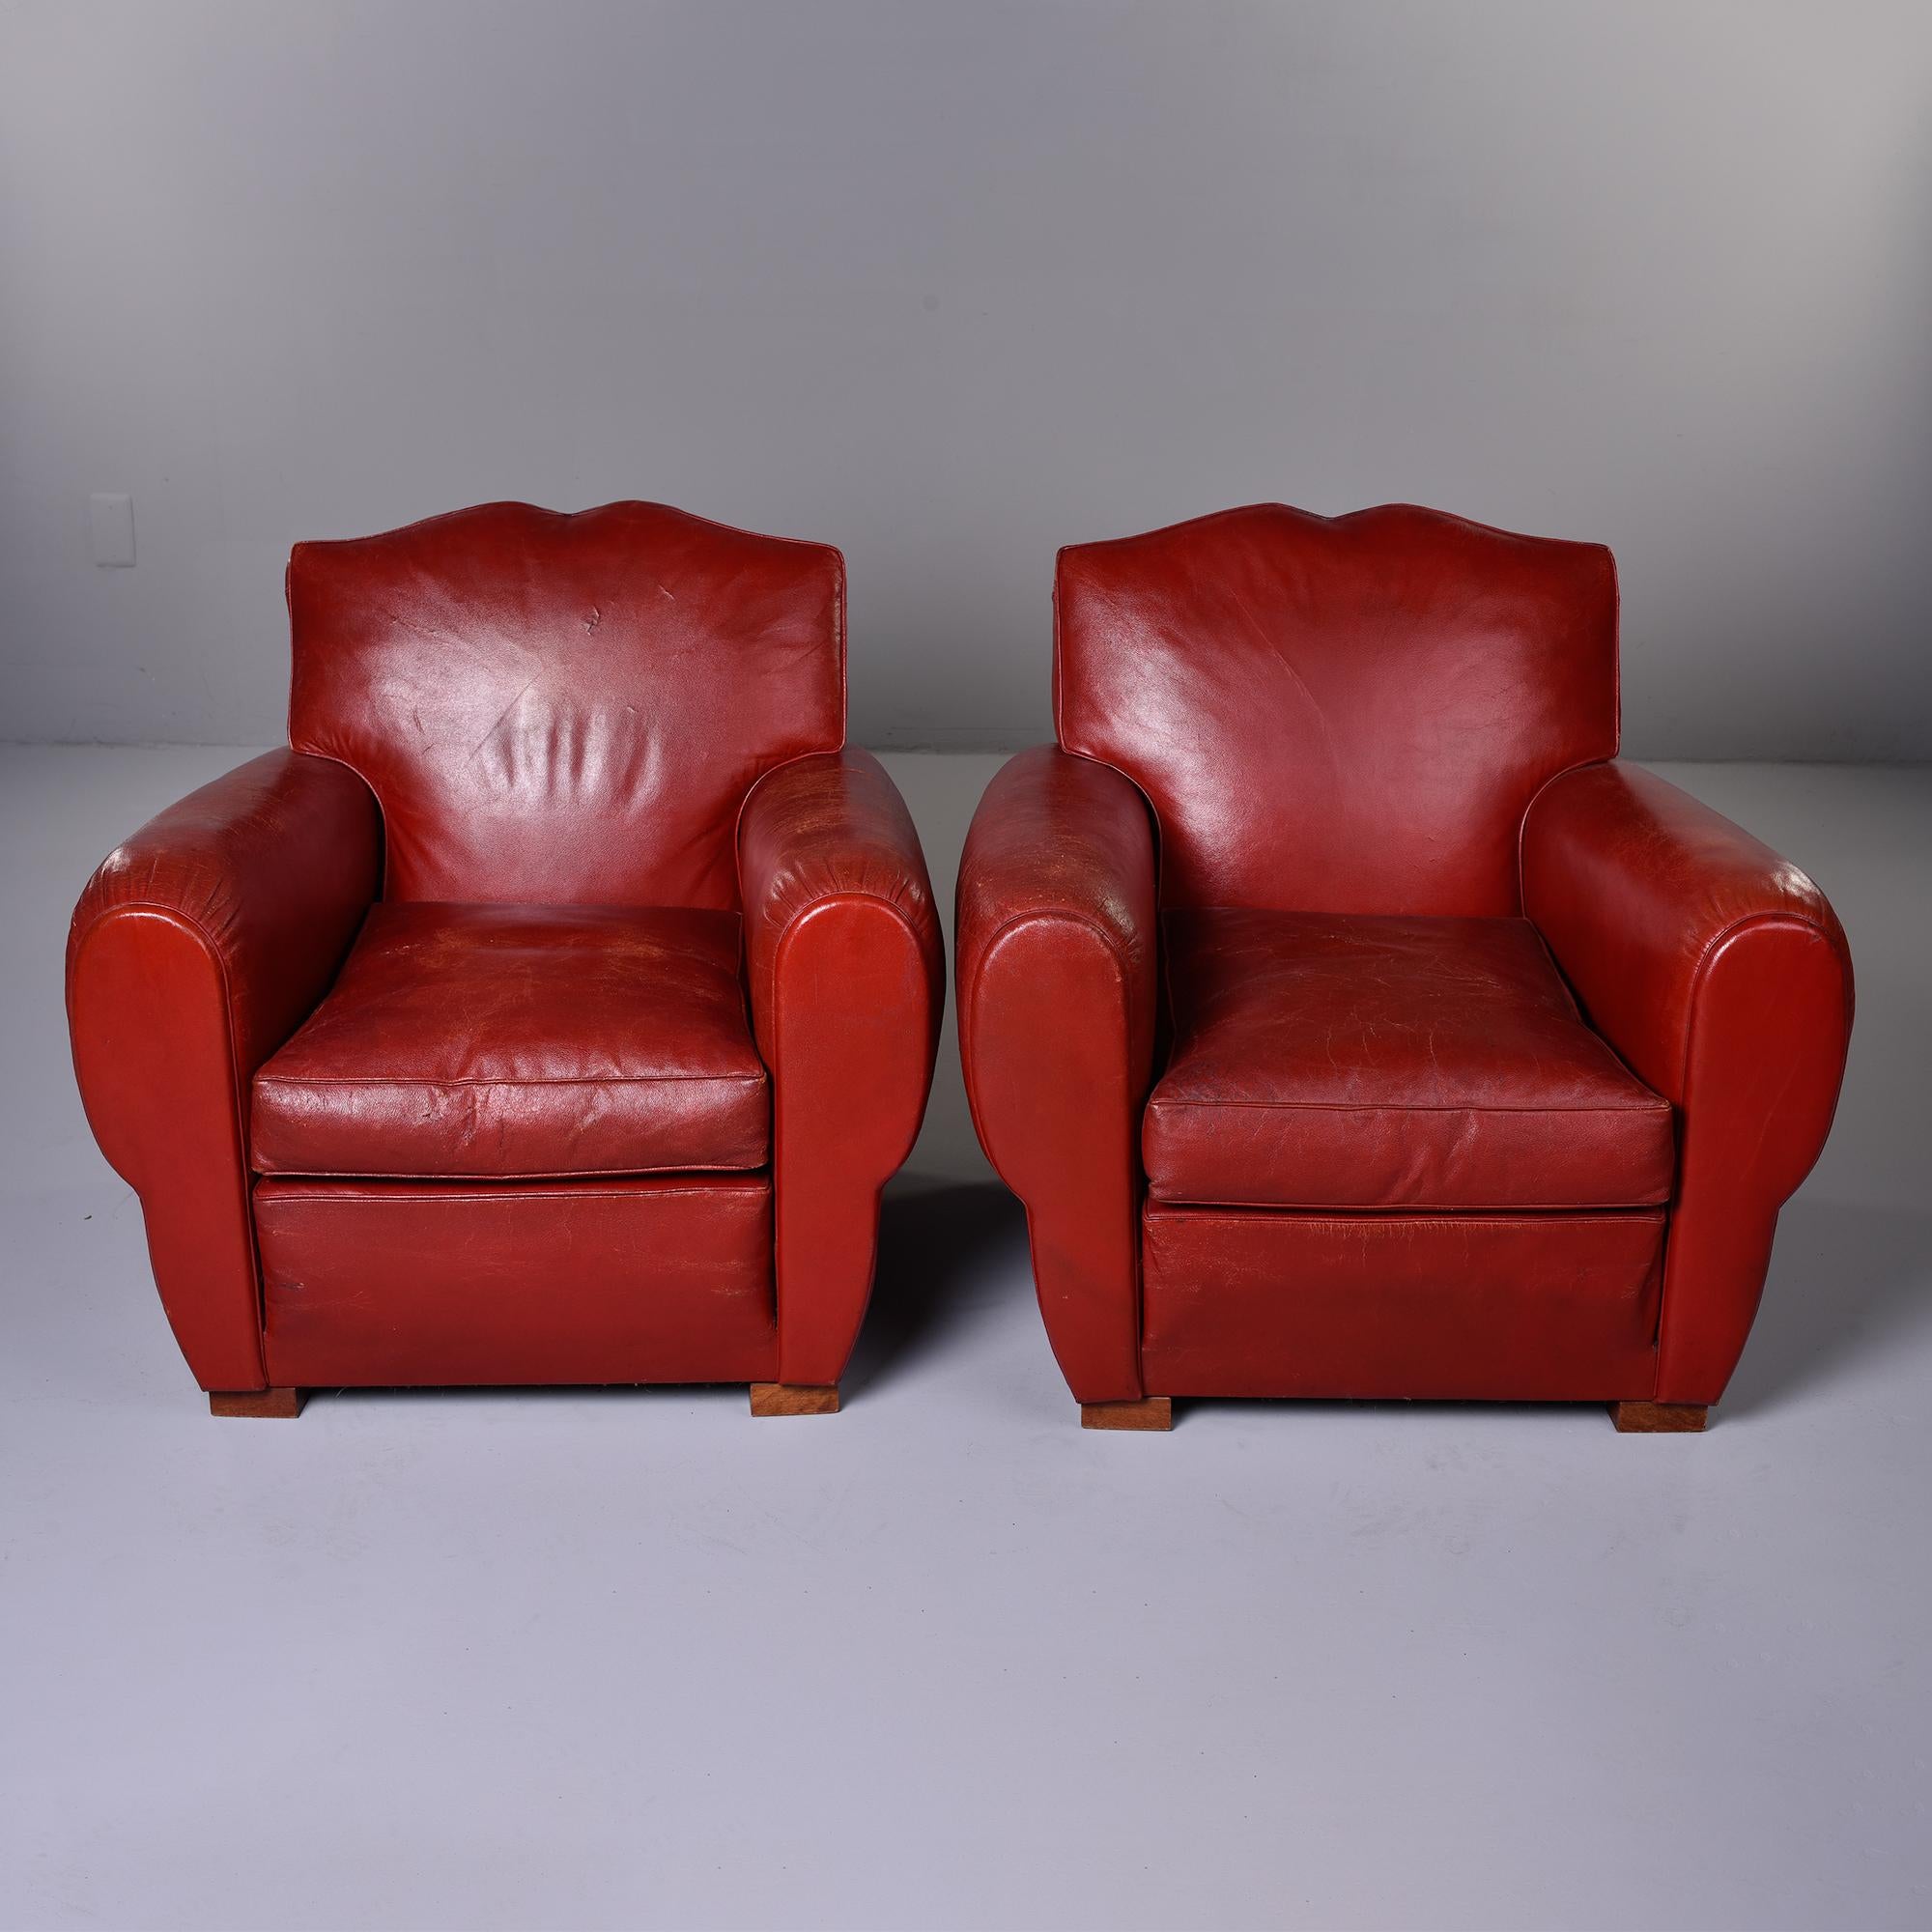 Found in England, this pair of circa 1950s club chairs feature the original deep red leather upholstery and mustache style back rests. Solid construction with spring seats and block feet. Unknown maker. Sold and priced as a pair. Original leather